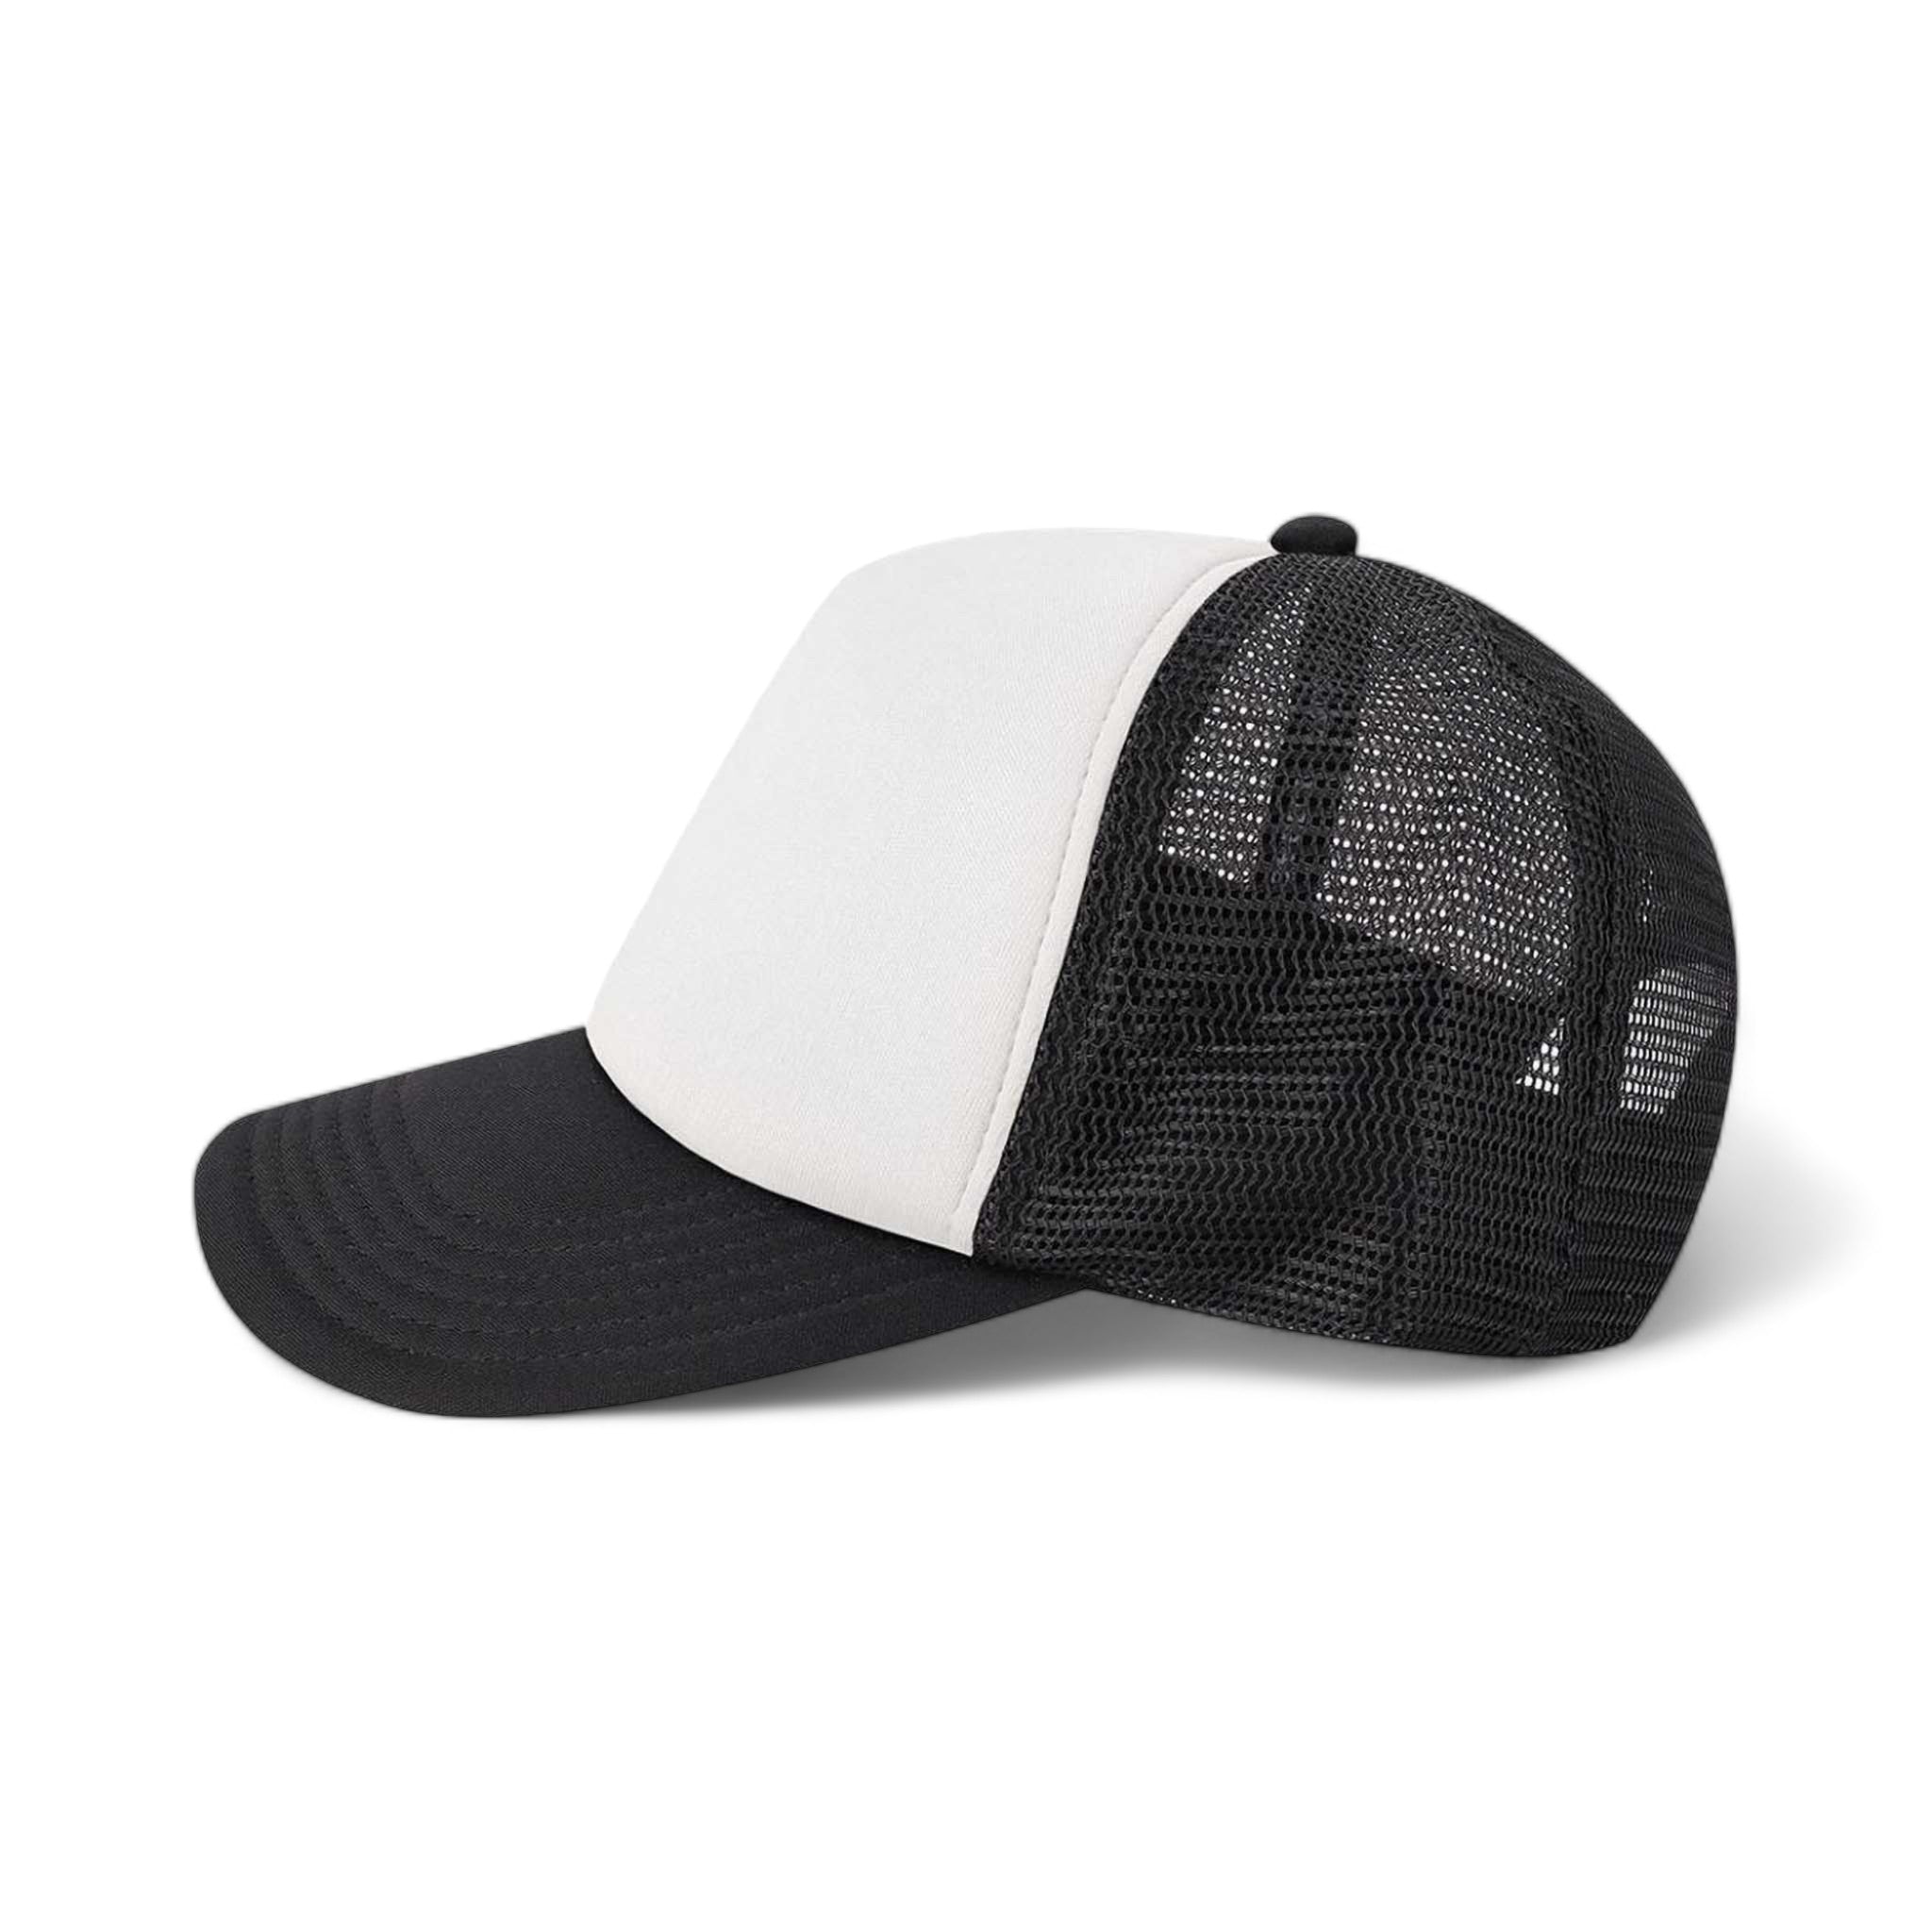 Side view of LEGACY LTA custom hat in white and black